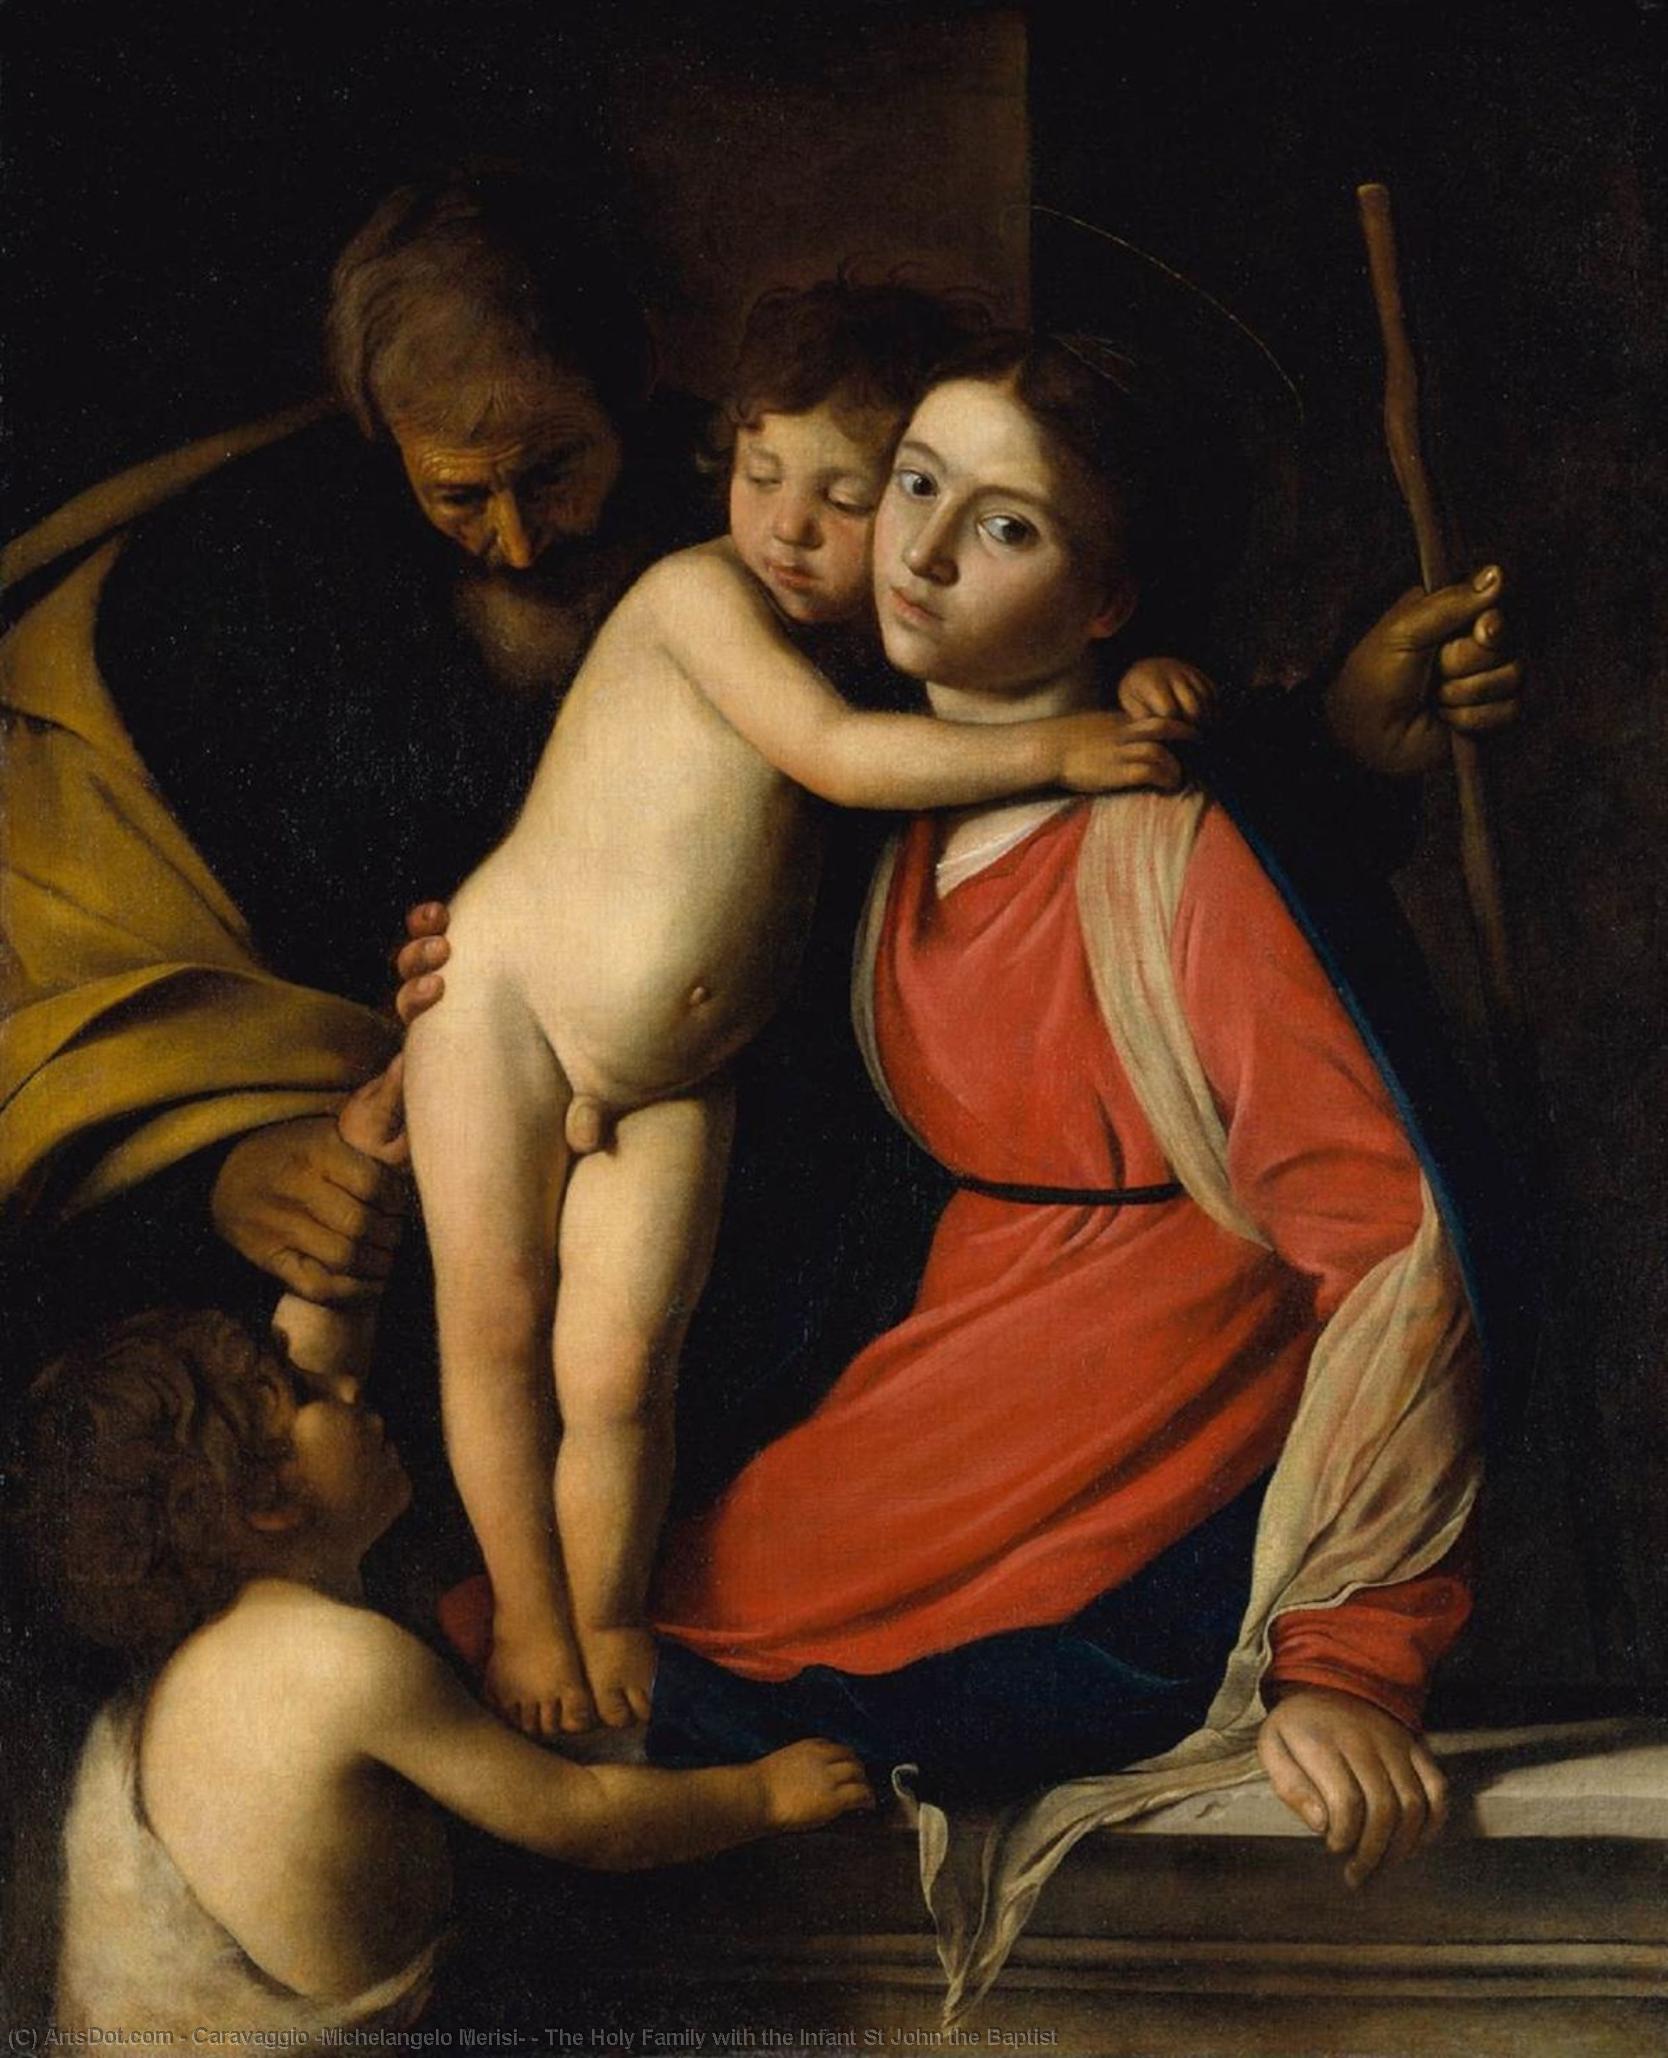 WikiOO.org - Encyclopedia of Fine Arts - Malba, Artwork Caravaggio (Michelangelo Merisi) - The Holy Family with the Infant St John the Baptist